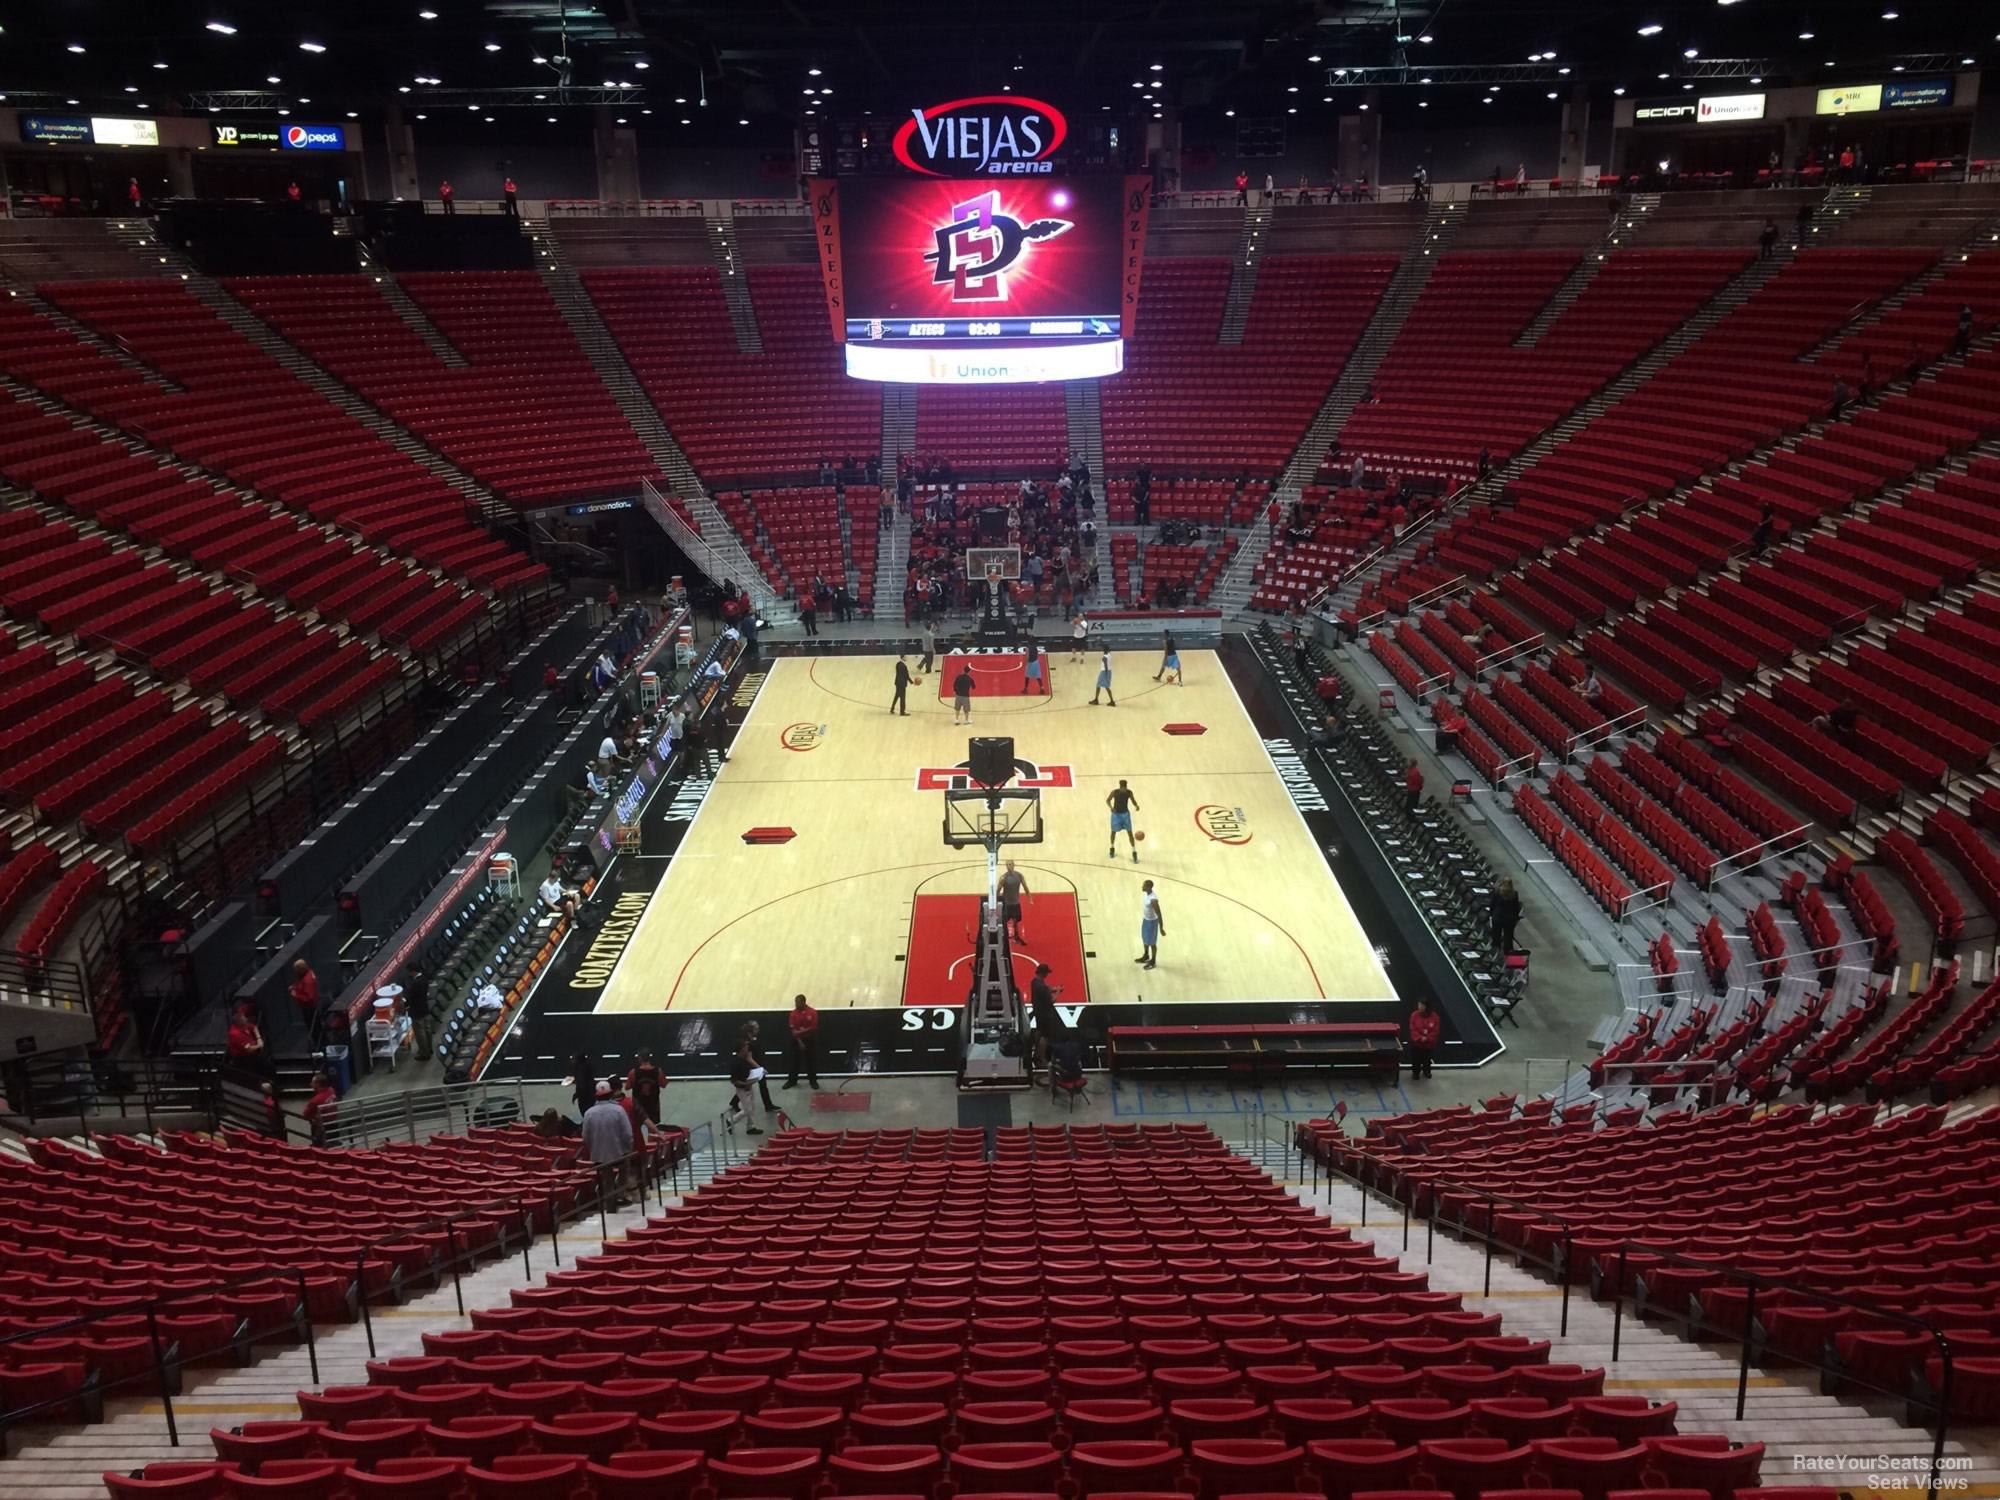 Section A at Viejas Arena 